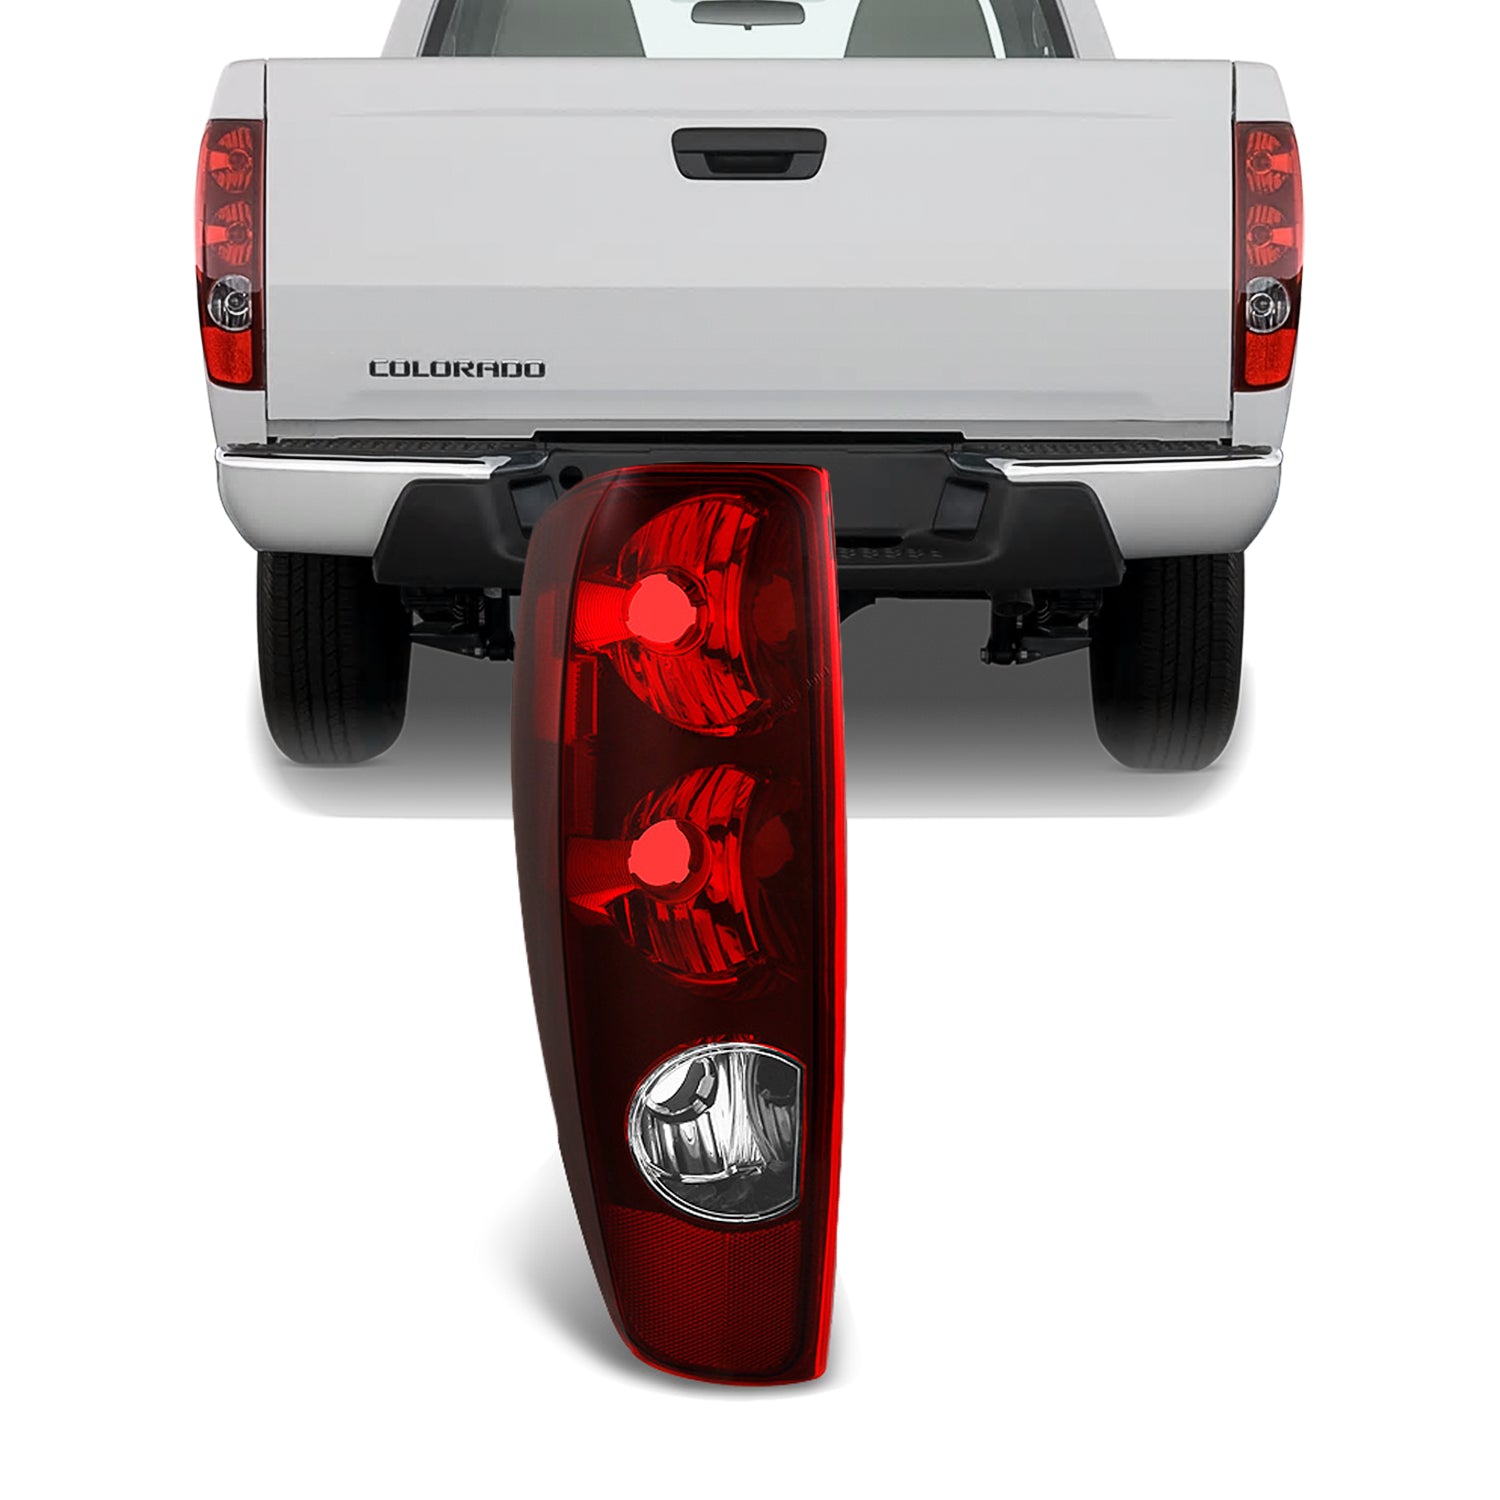 AKKON - For Chevy Colorado /GMC Canyon Pickup Truck Red Clear Tail Bra